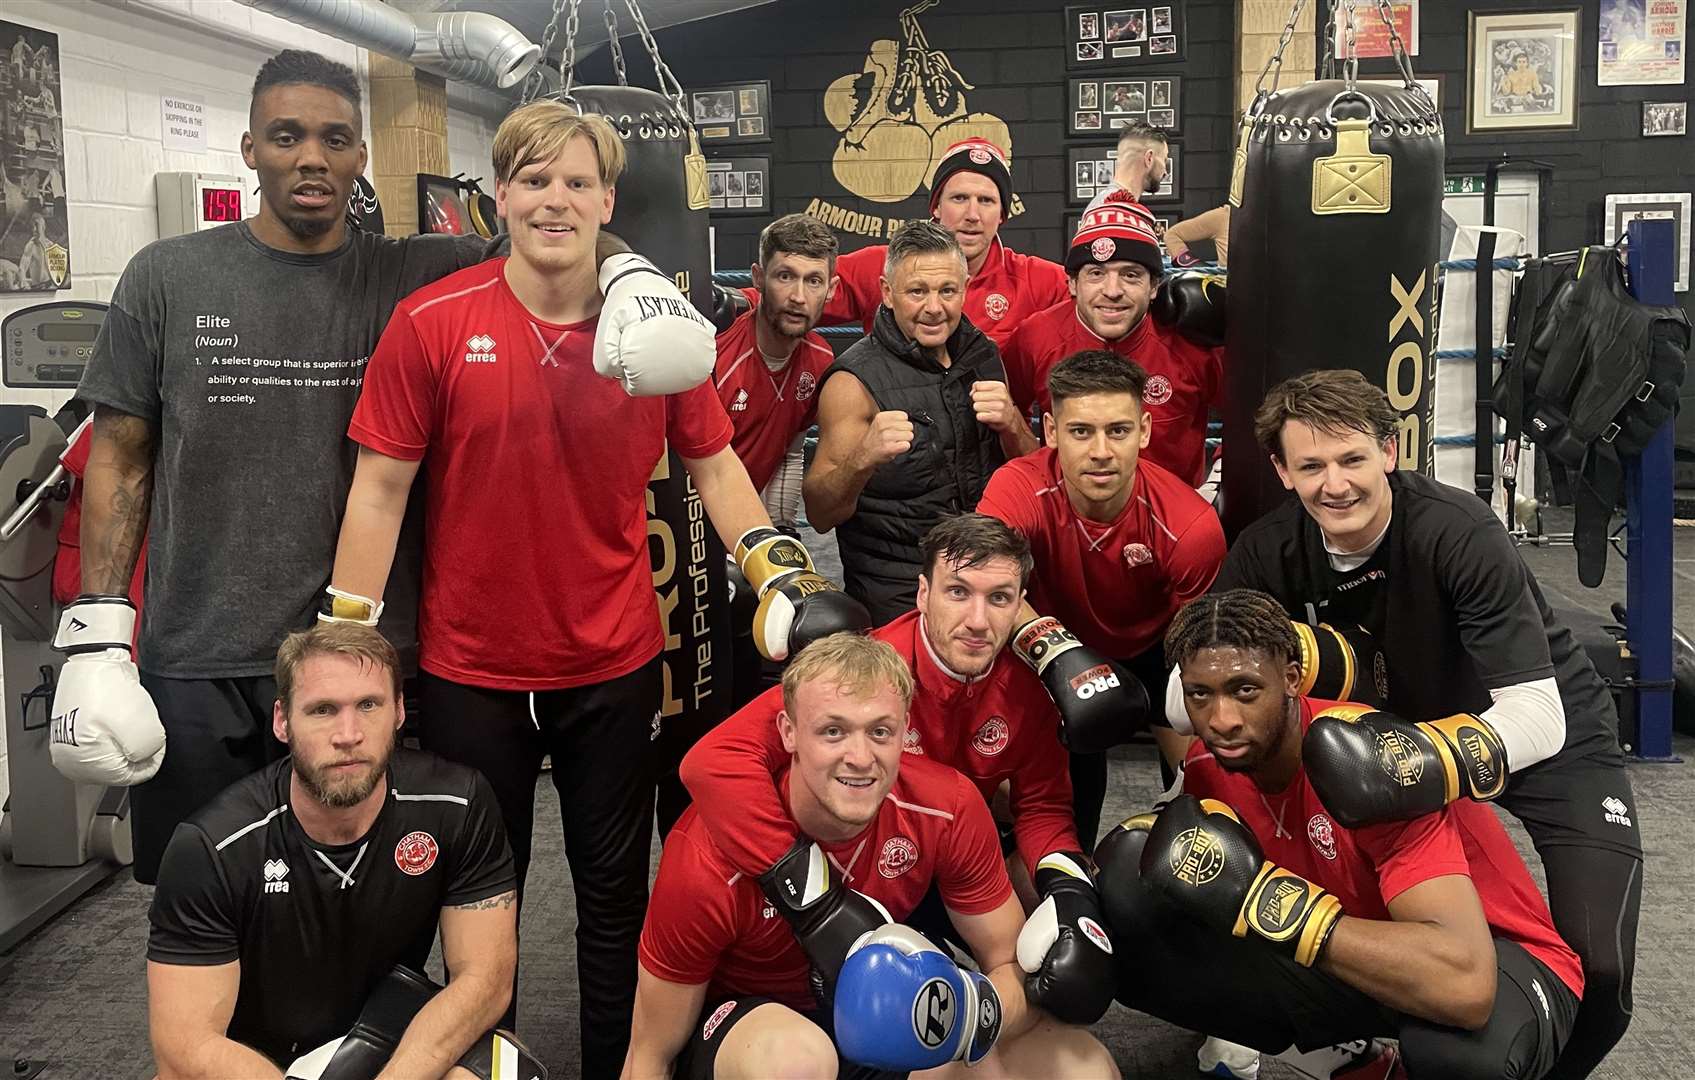 Chatham Town's players at their boxing workout with Johnny Armour